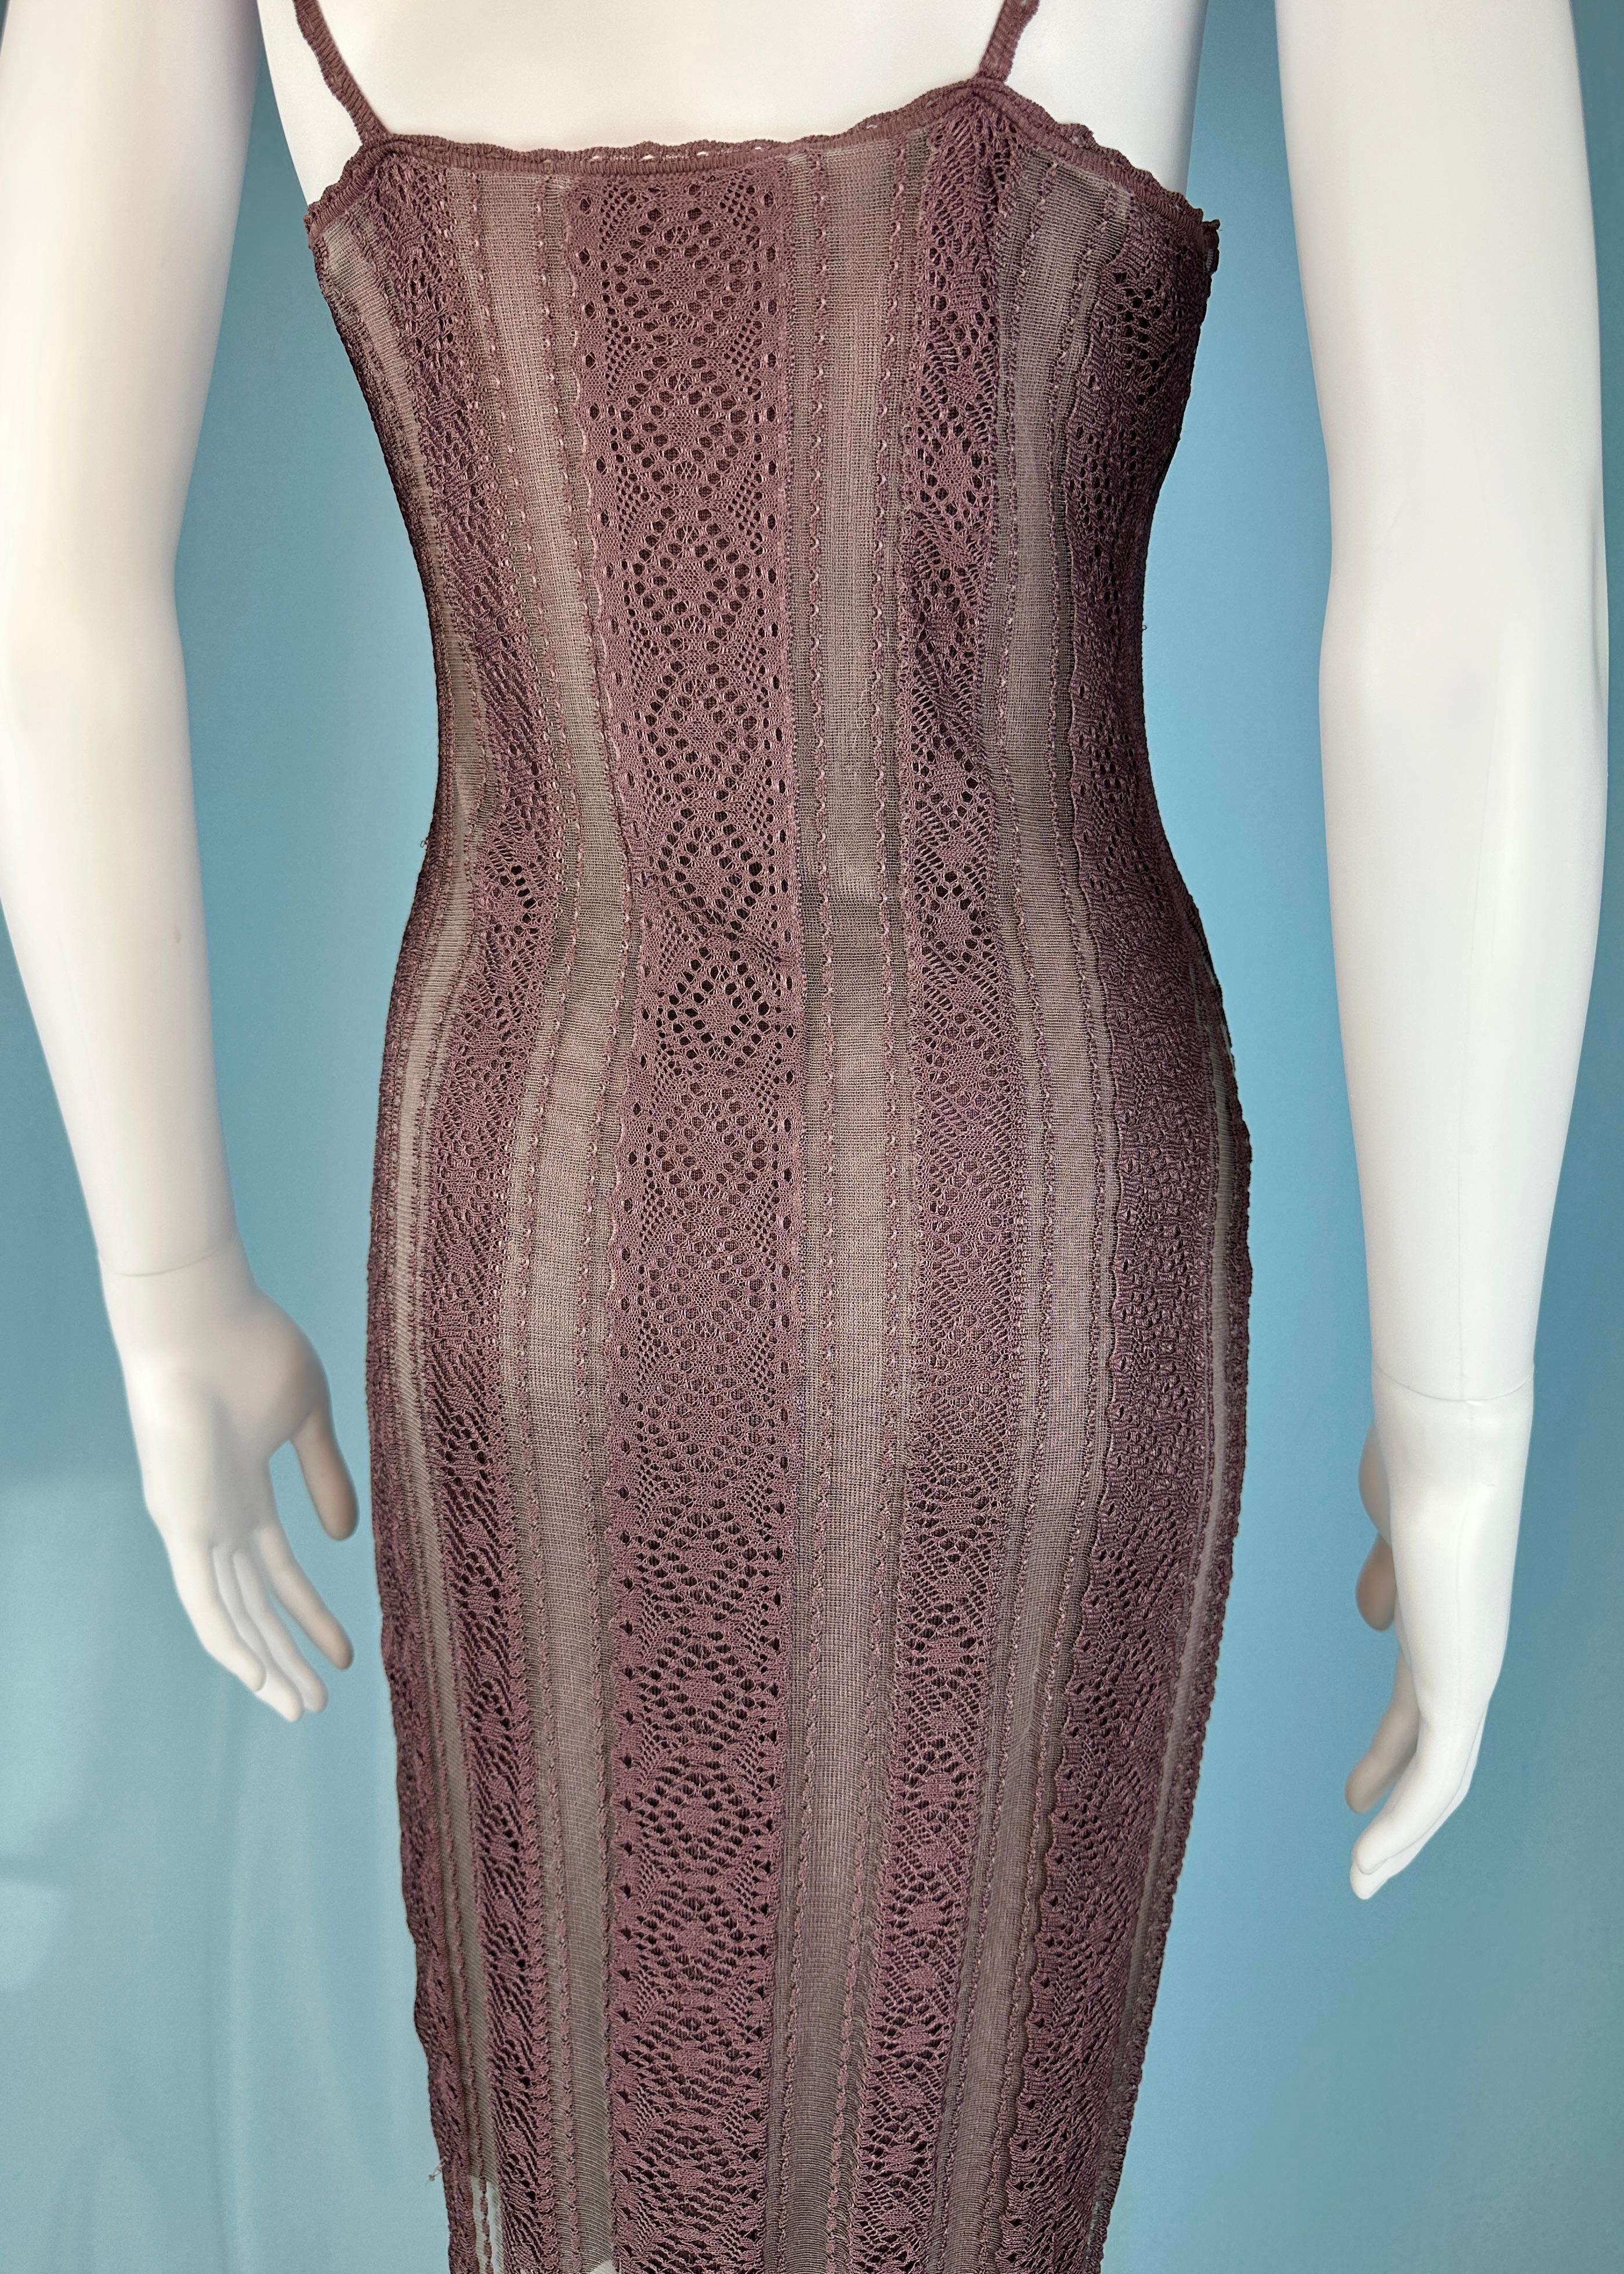 Dior Spring 2000 Purple Mesh Knit Dress In Good Condition For Sale In Hertfordshire, GB